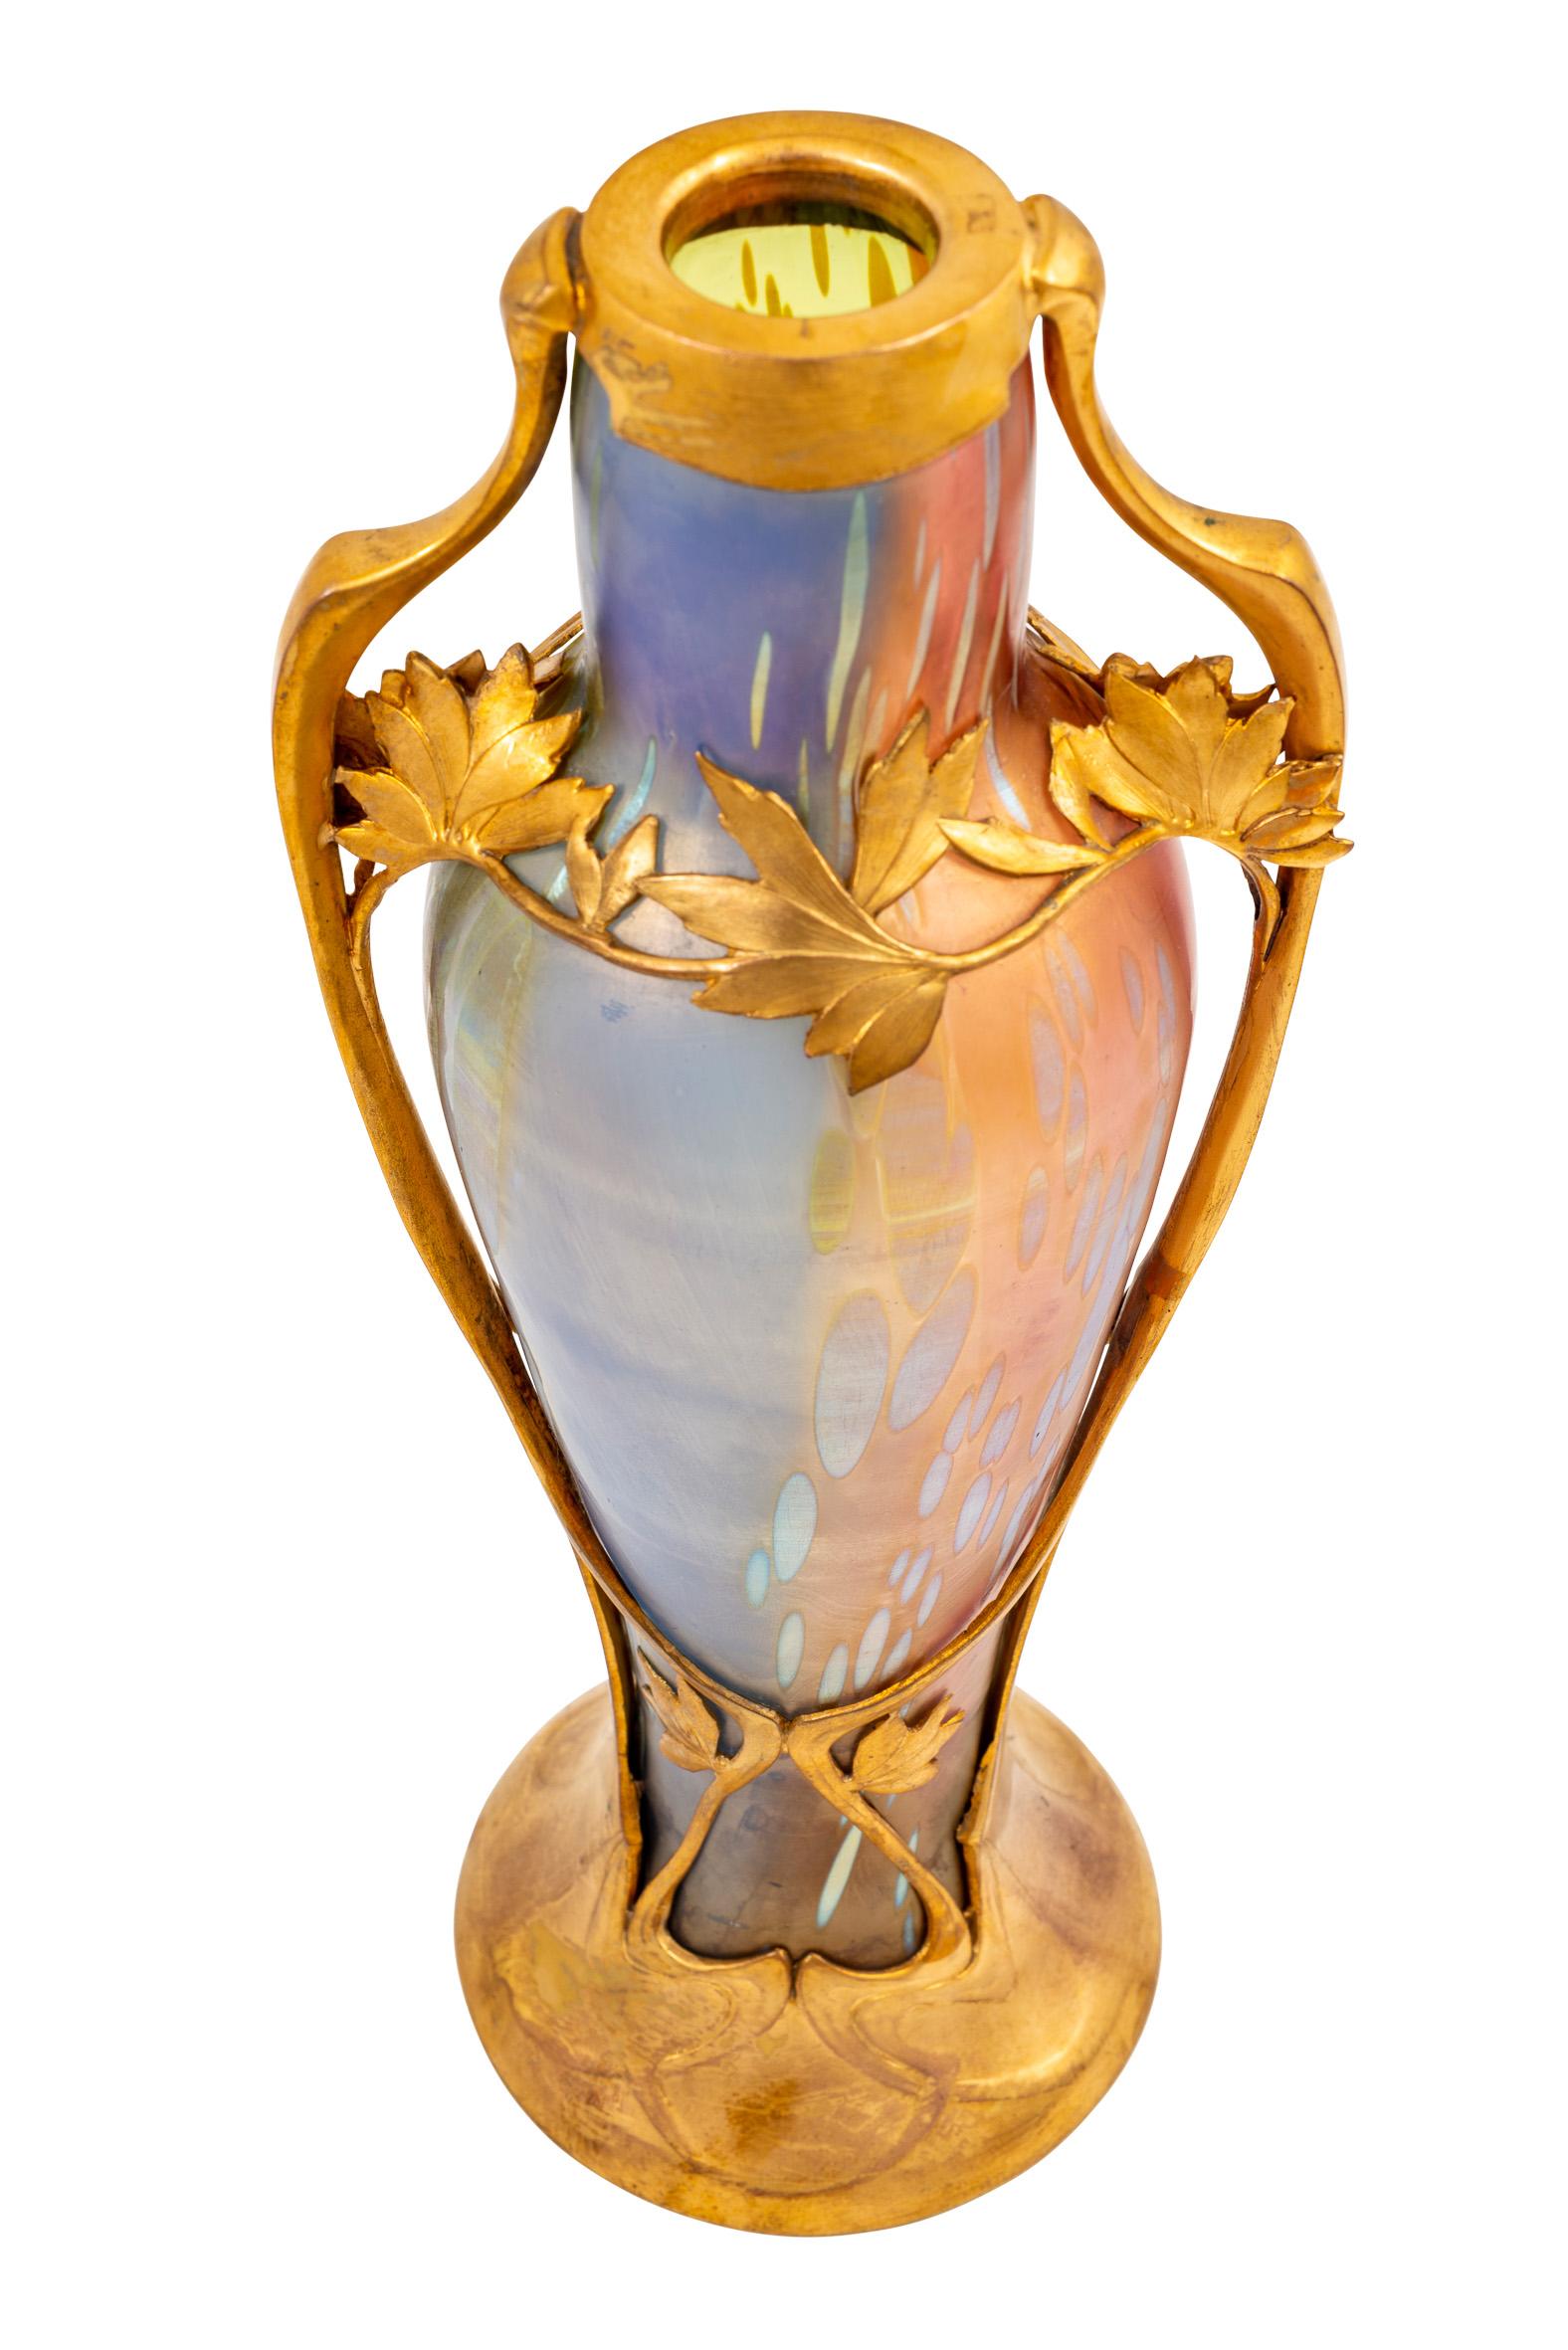 Austrian Jugendstil Glass Vase Tricolore Decoration with Metal Mount circa 1900 In Good Condition For Sale In Klosterneuburg, AT